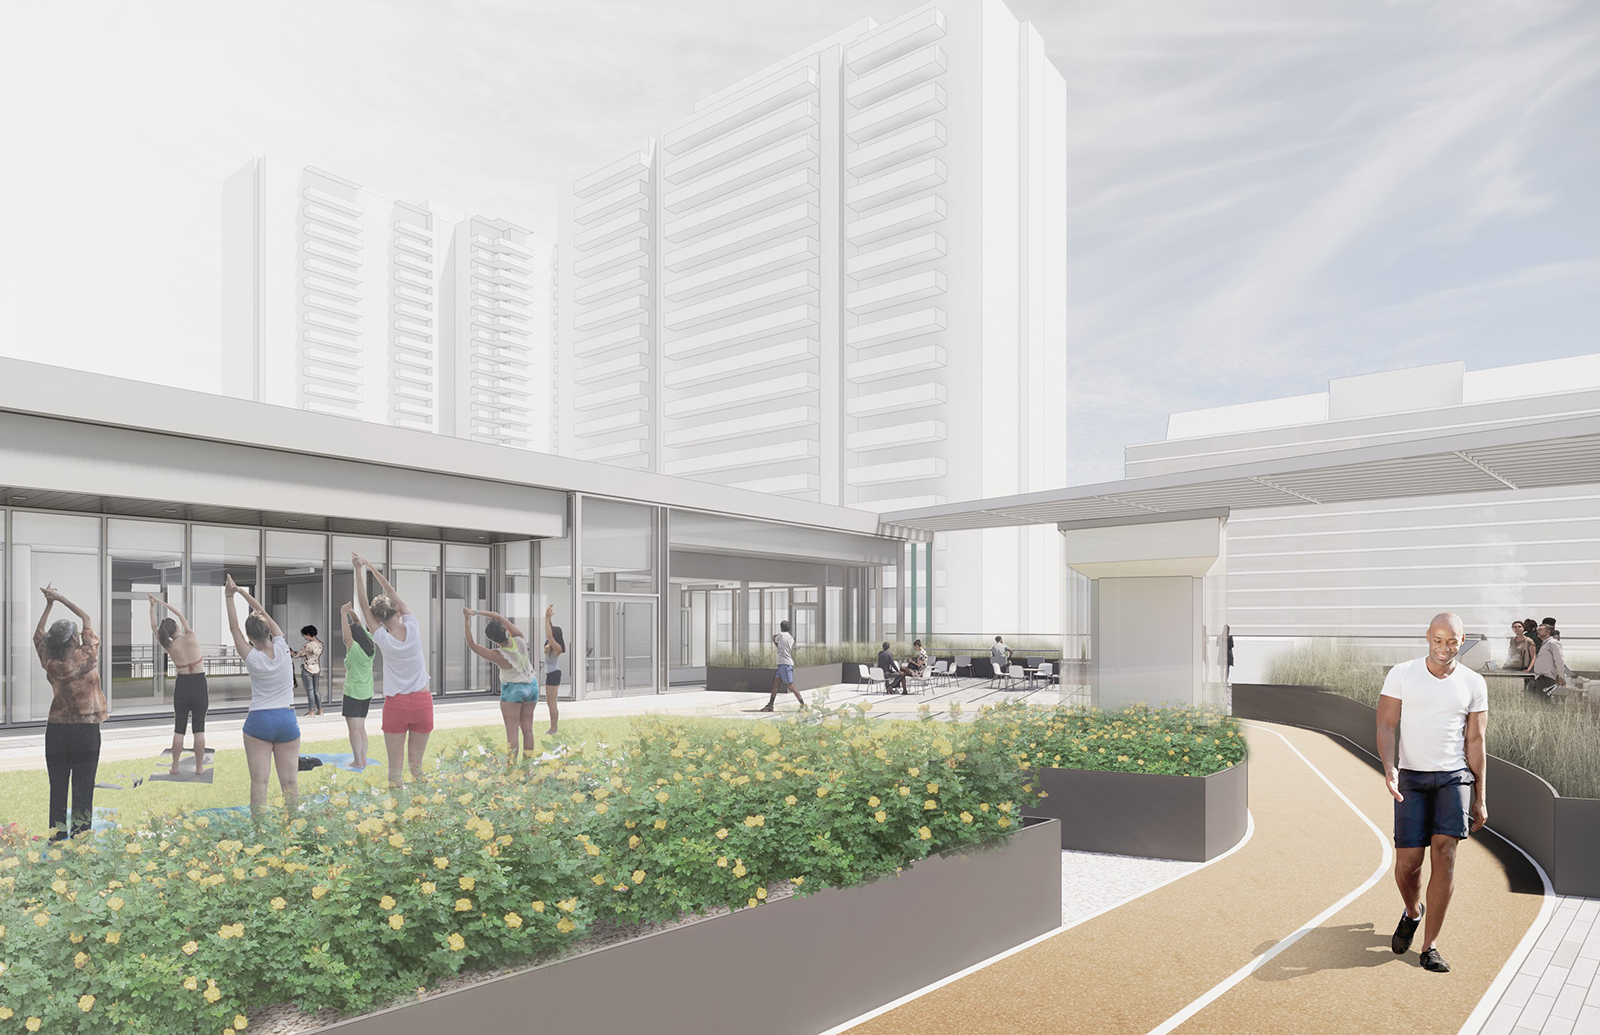 A rendering of the rooftop facing south. In the centre are raised planters and a multi-purpose lawn with people exercising. In the background on the left are glass walls that lead to the third floor indoor multipurpose spaces. In the background centre, there is a pergola over seating and gathering spaces, including a barbeque. On the right, a man is walking on the walking track, that circles most of the rooftop space.